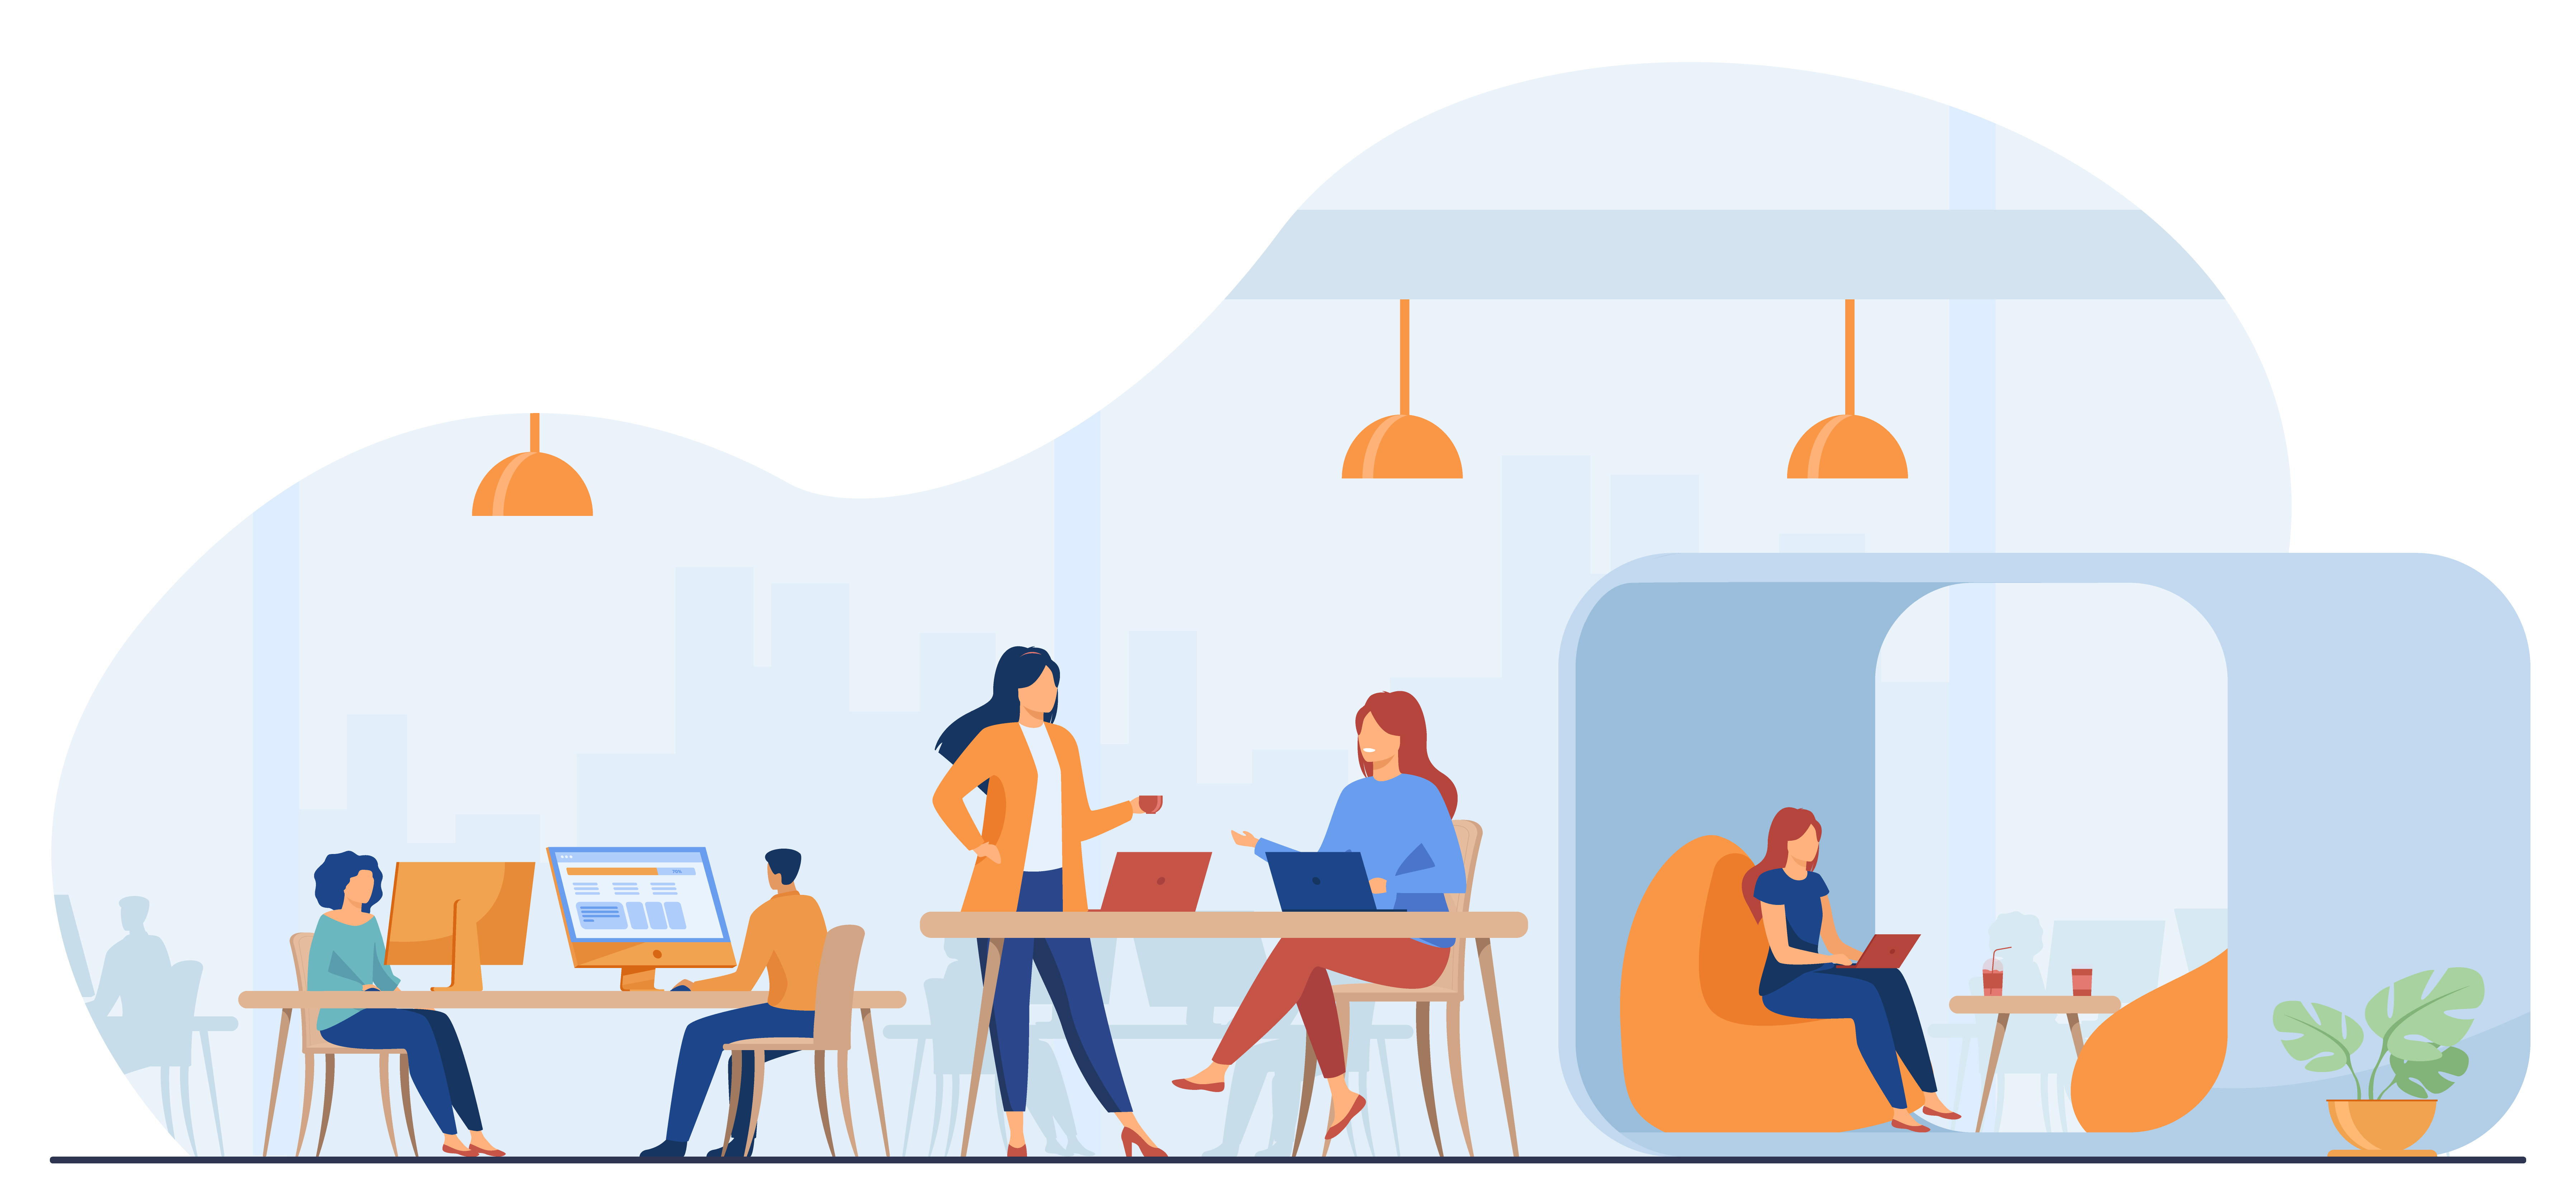 A flat illustration of people working in an office for a website design and development company in hyderabad